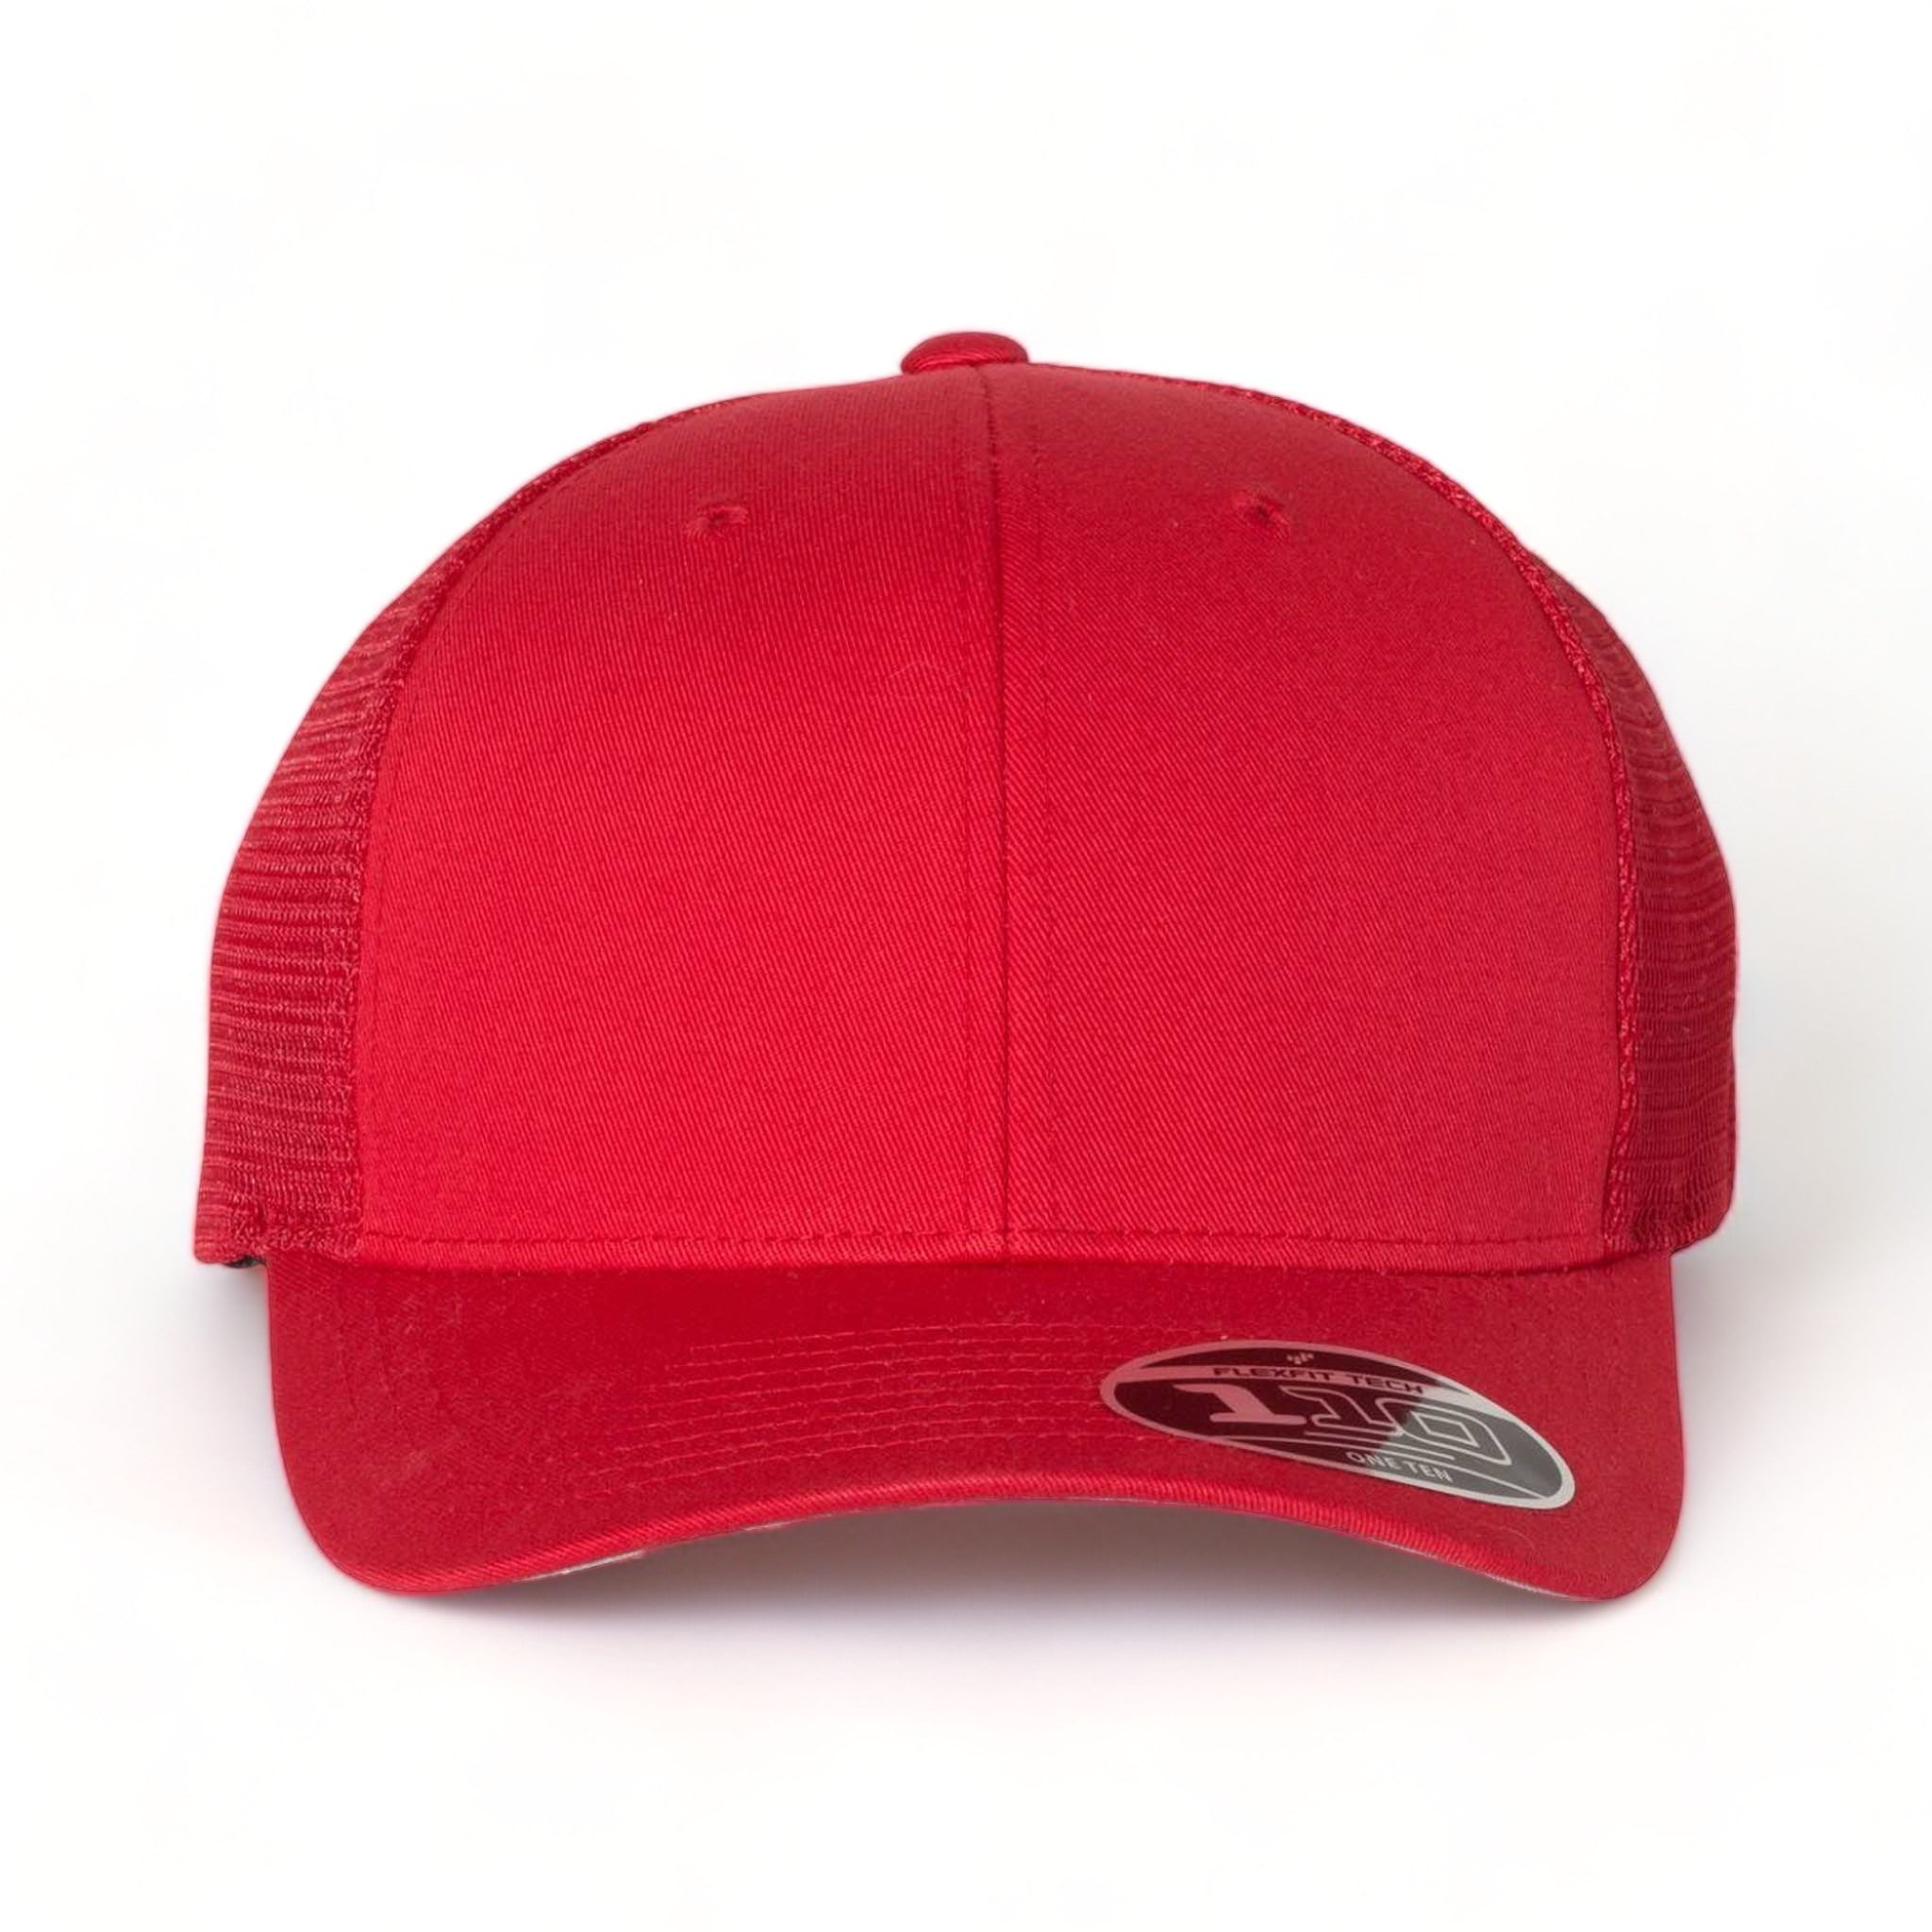 Front view of Flexfit 110M custom hat in red